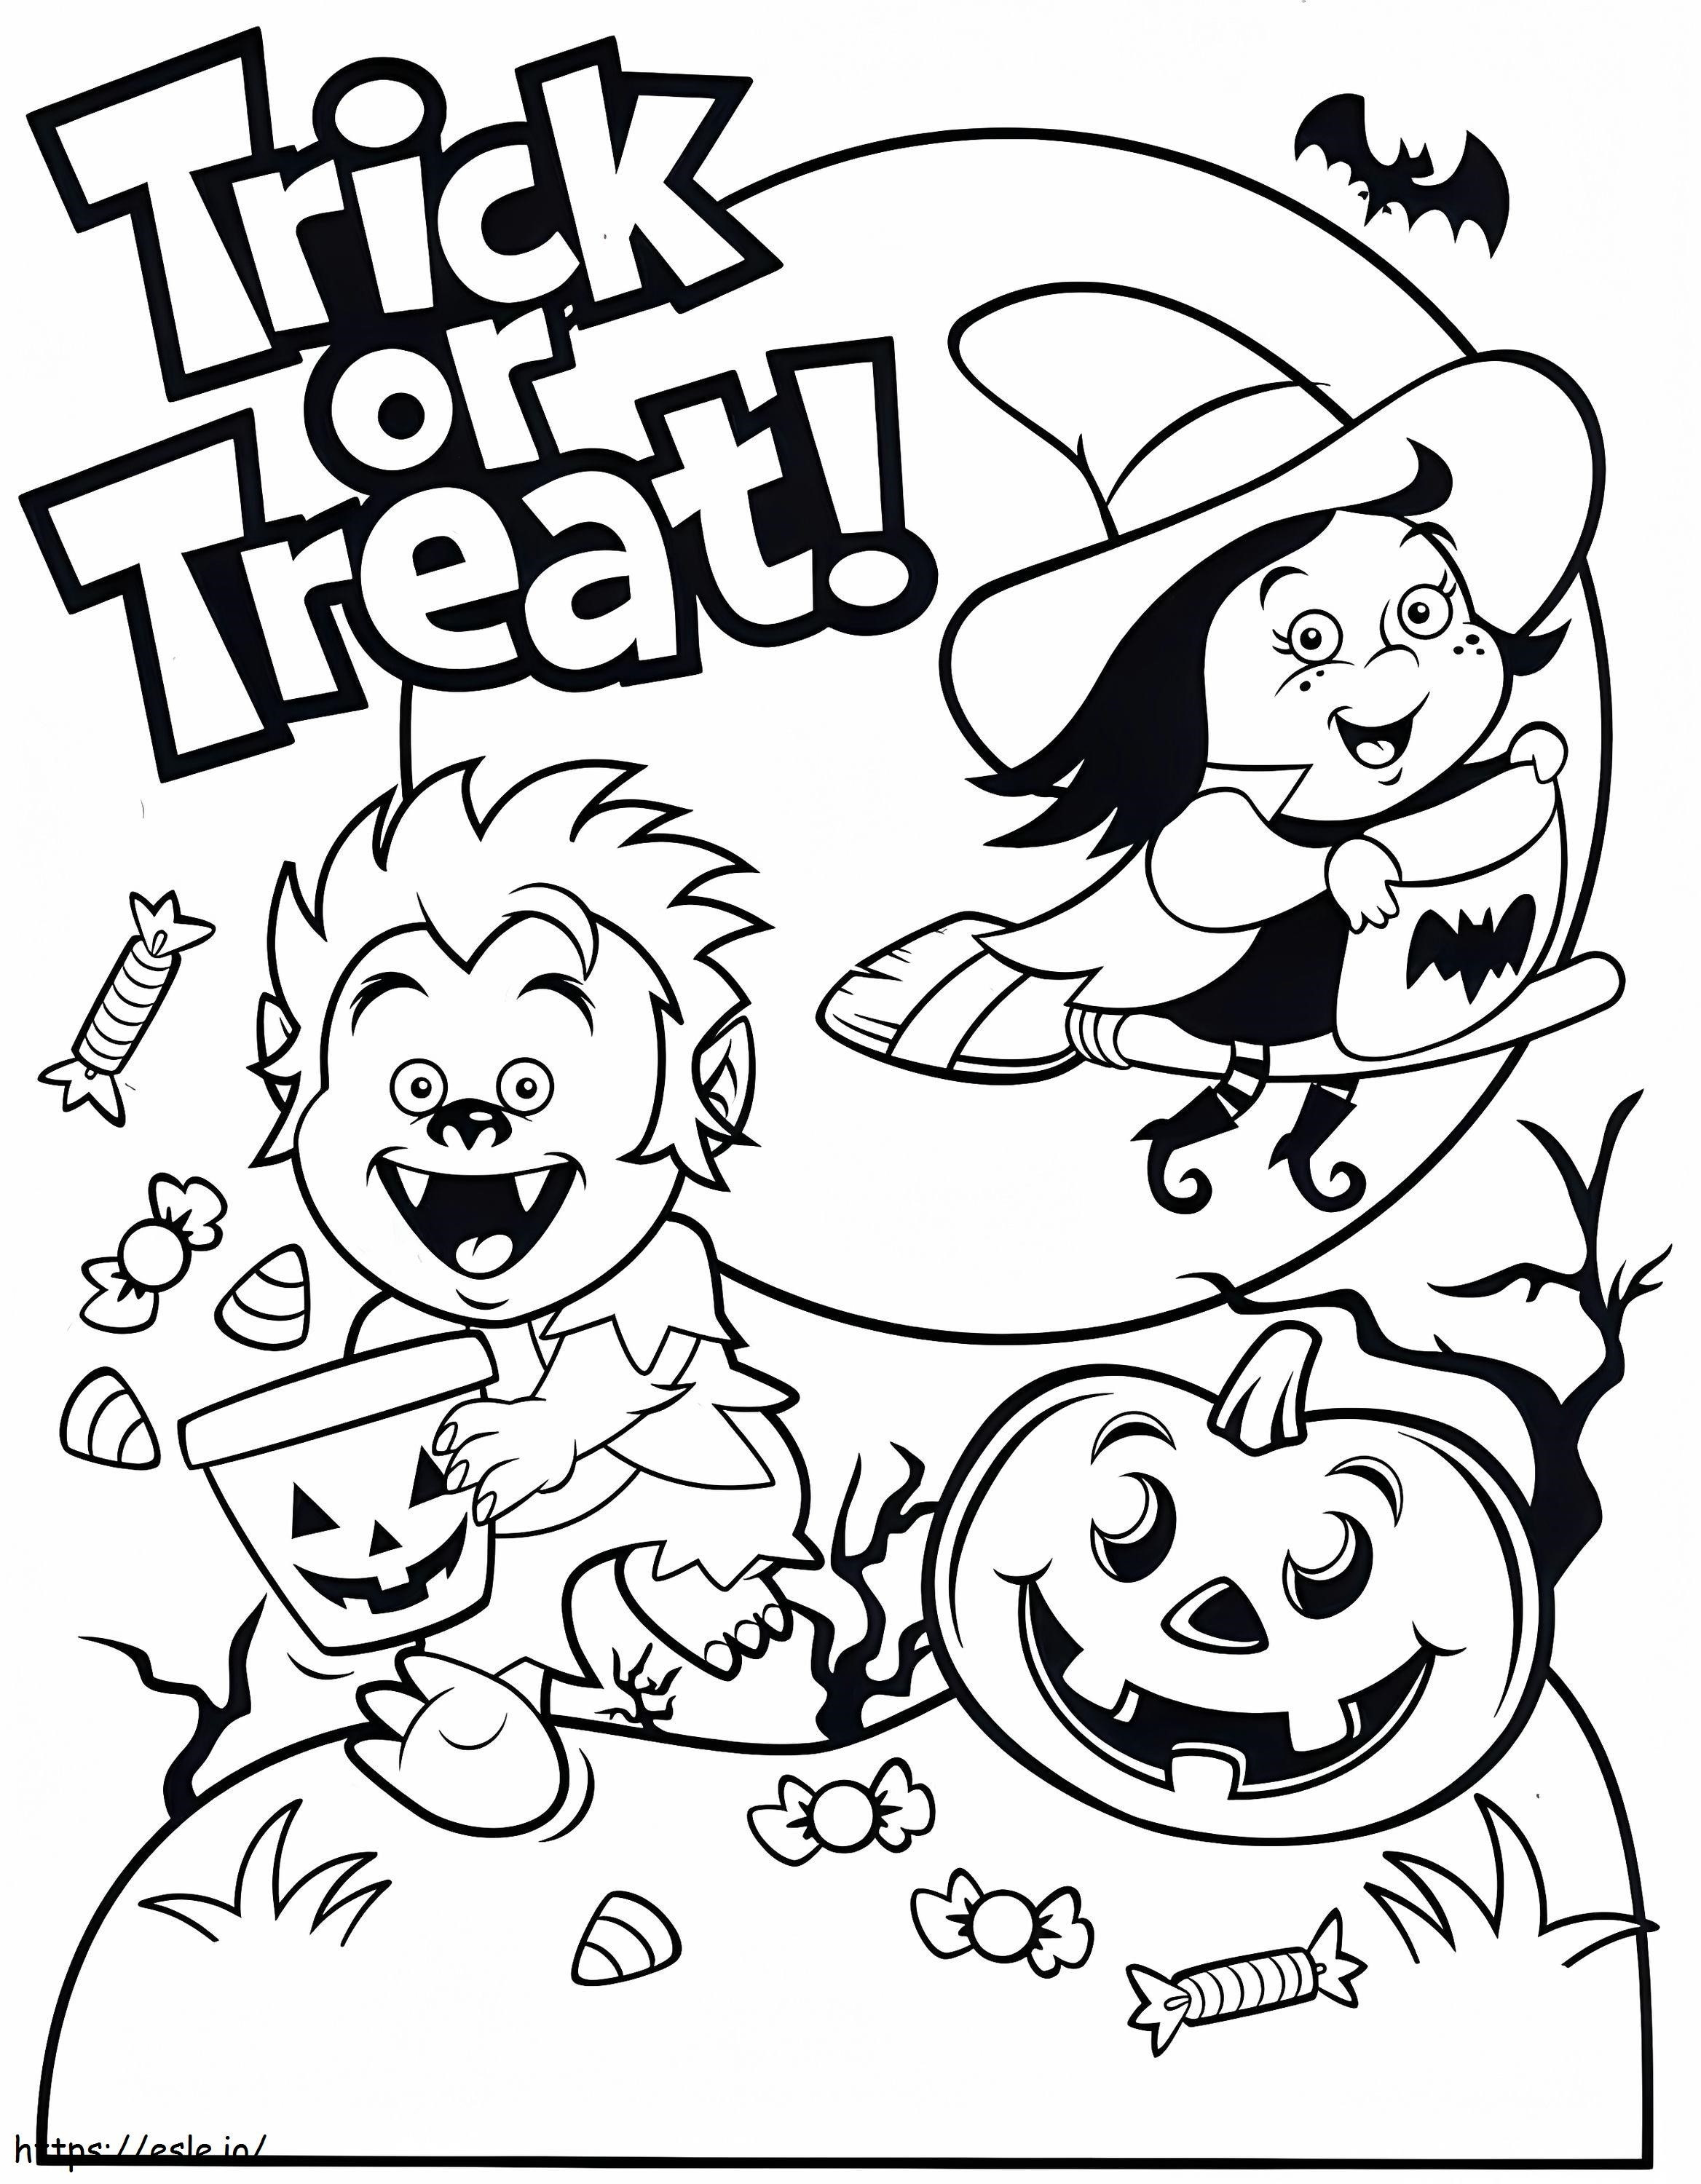 1539691496 Trick Or Treat Bag Party Free Printable Ideas Page coloring page